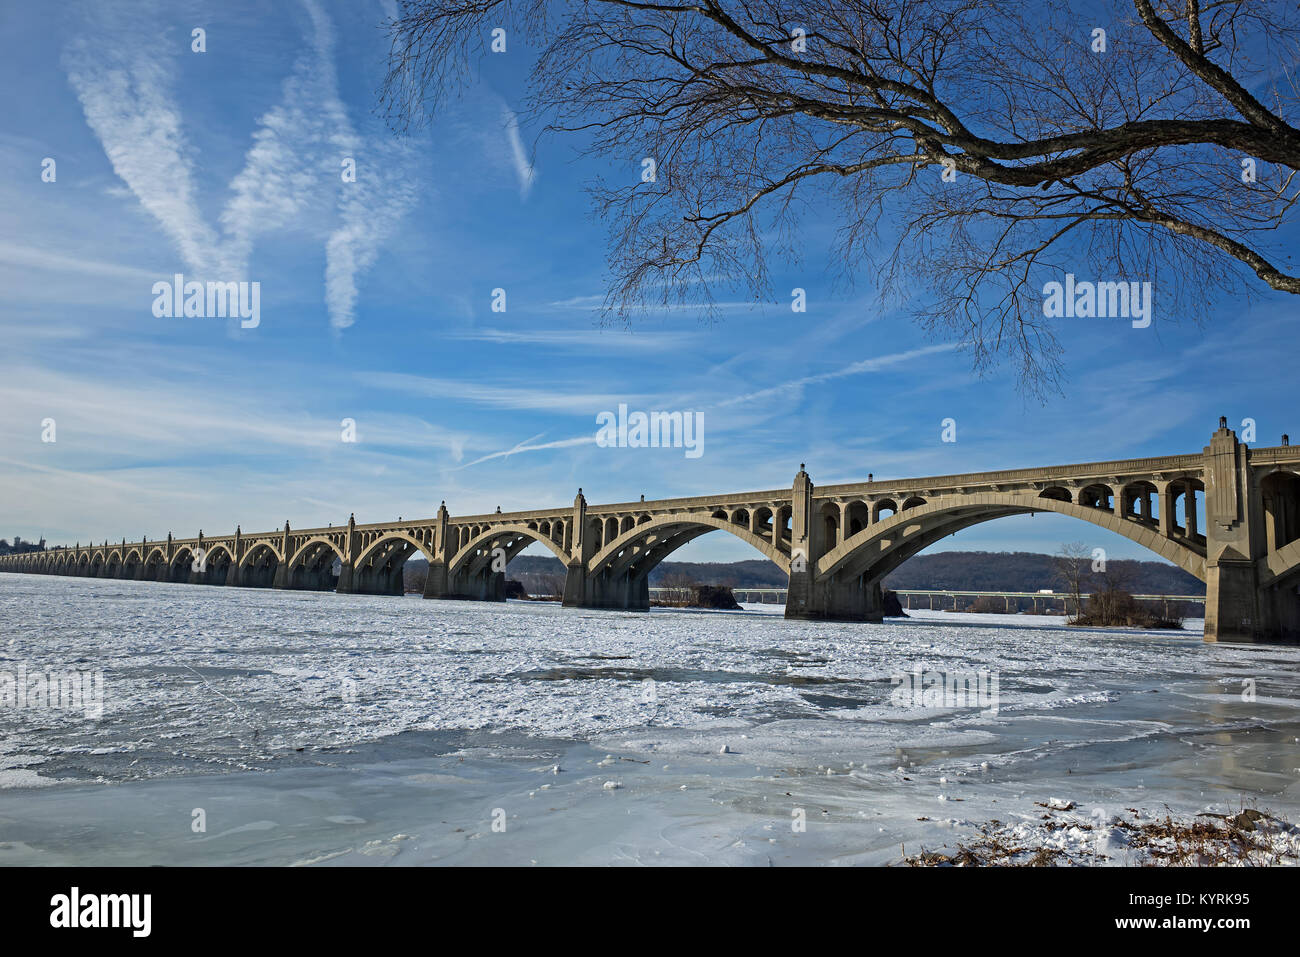 Frozen Susquehanna River in PA, USA. It is the longest river on the East Coast of the United States that drains into the Atlantic Ocean. Stock Photo